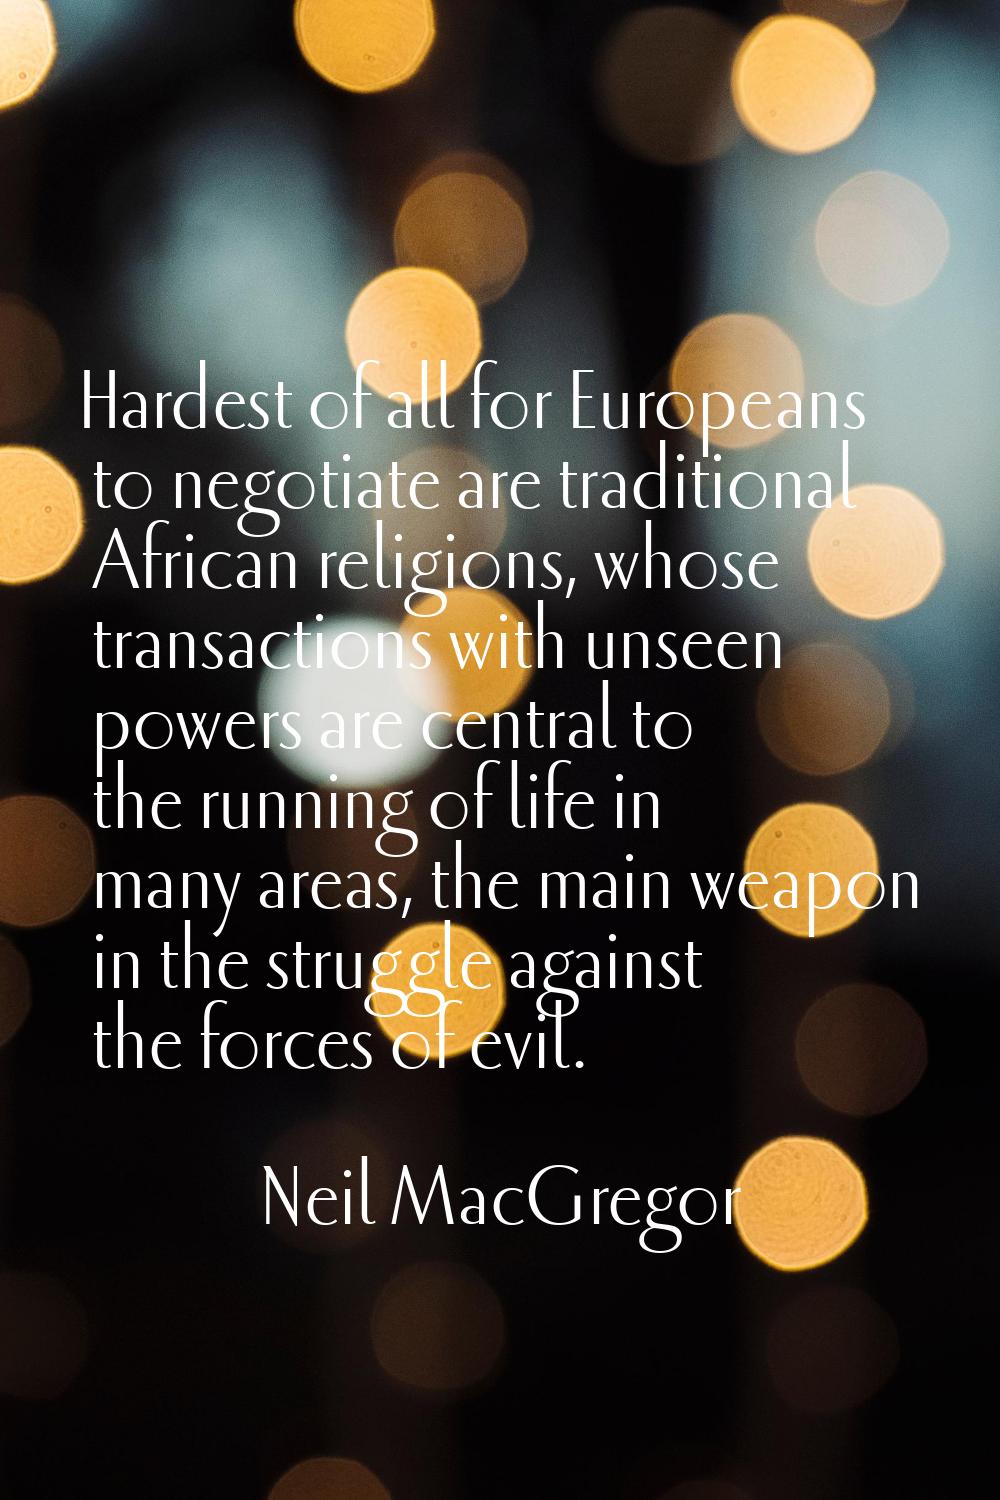 Hardest of all for Europeans to negotiate are traditional African religions, whose transactions wit